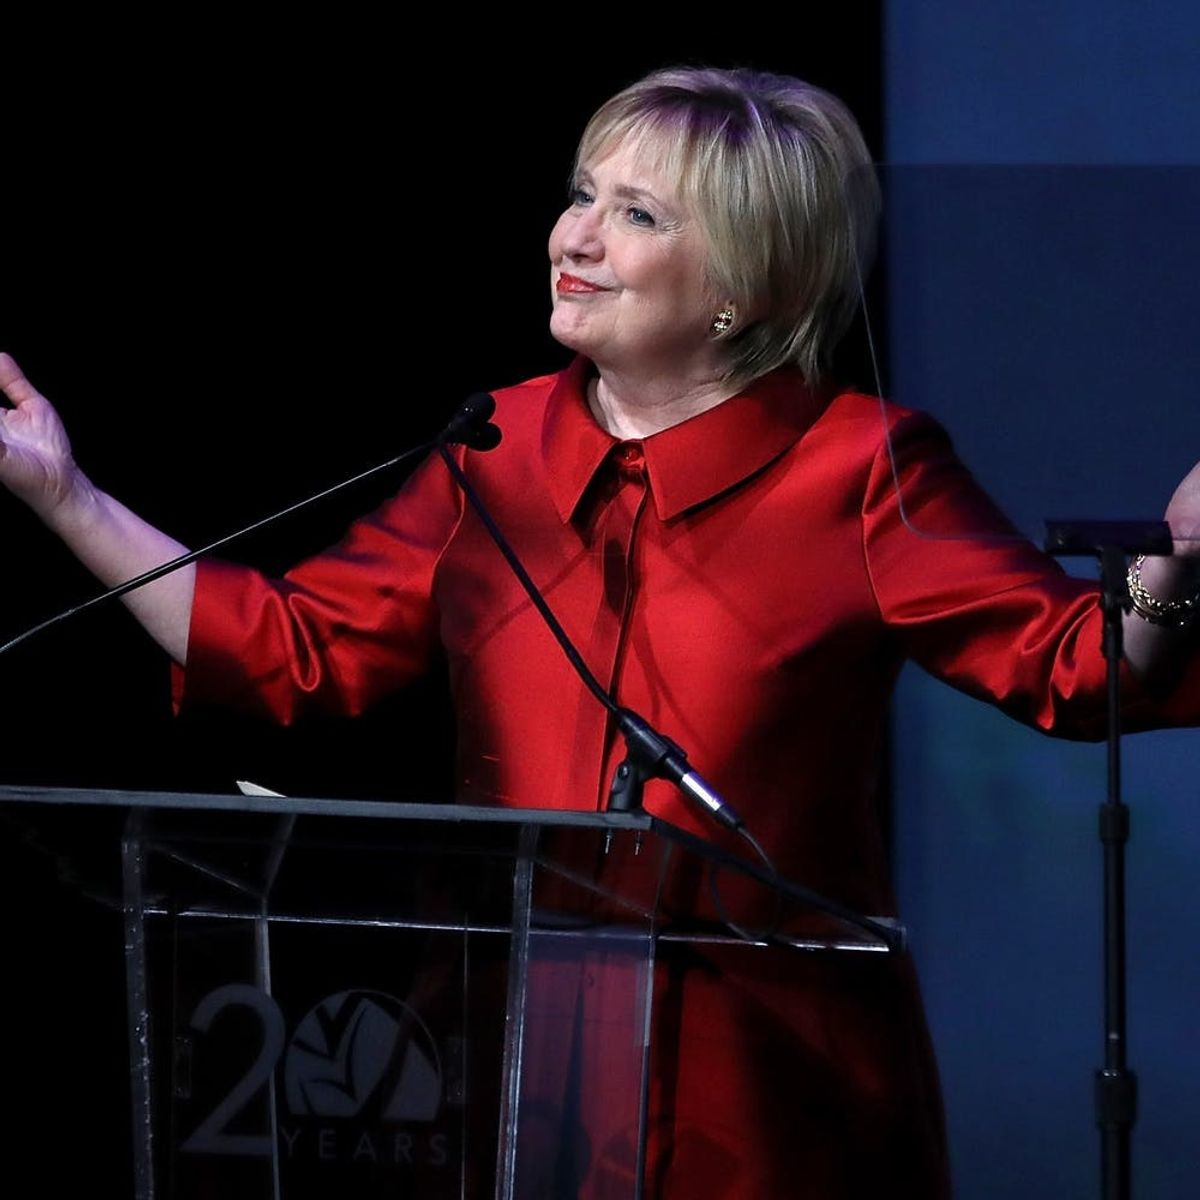 Have You Seen Hillary Clinton’s New Bangs?